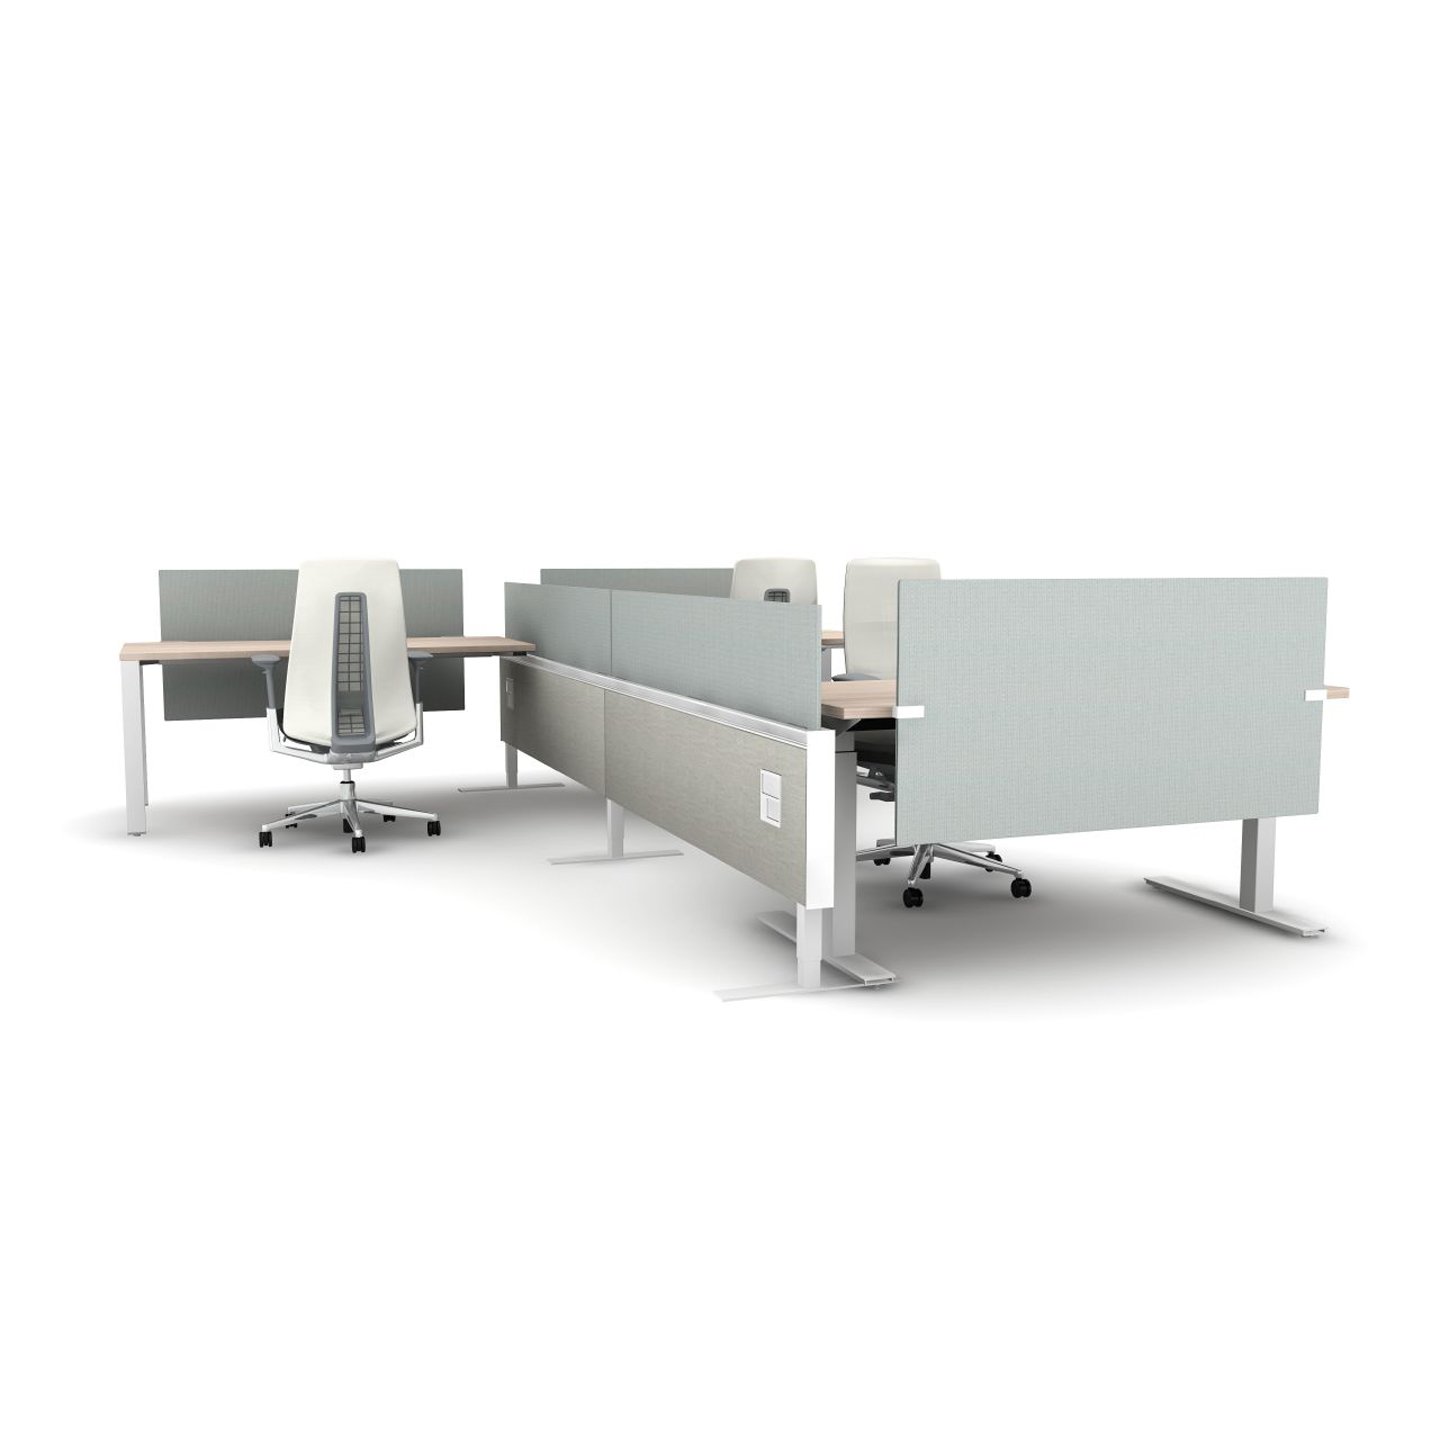 Haworth Compose Connections workspace divider in grey with closed desk area and open desk area for office mock up